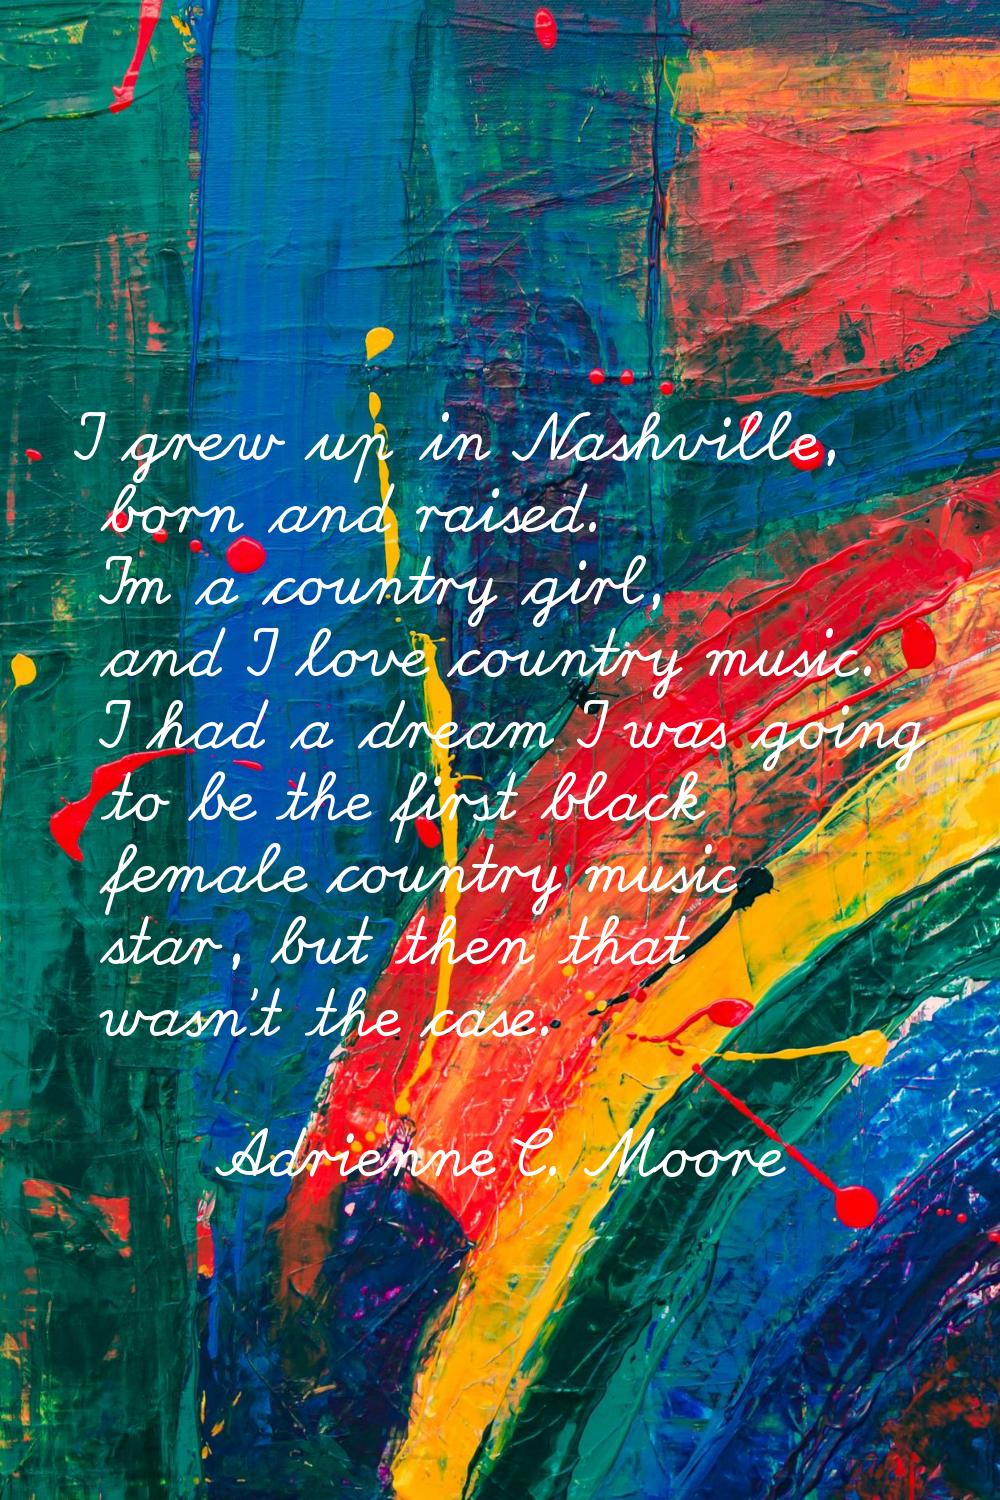 I grew up in Nashville, born and raised. I'm a country girl, and I love country music. I had a drea